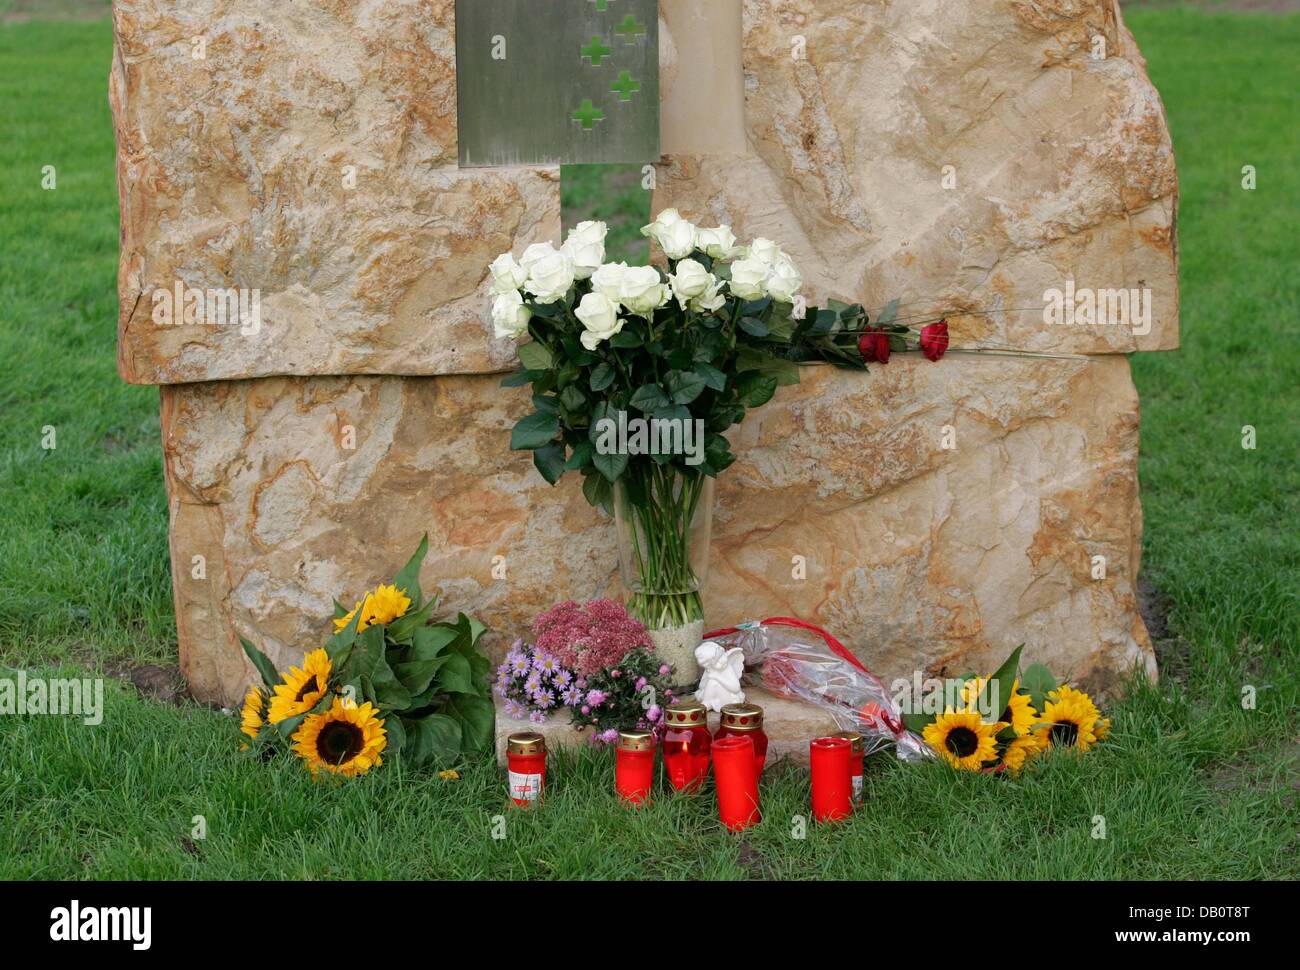 White roses, candles and sun flowers are laid to a memorial stone during a oecumenical service in Lathen, Germany, 22 September 2007. Exactly one year ago, a Transrapid train crashed on the test track, 23 people were killed. Photo: Firso Gentsch Stock Photo